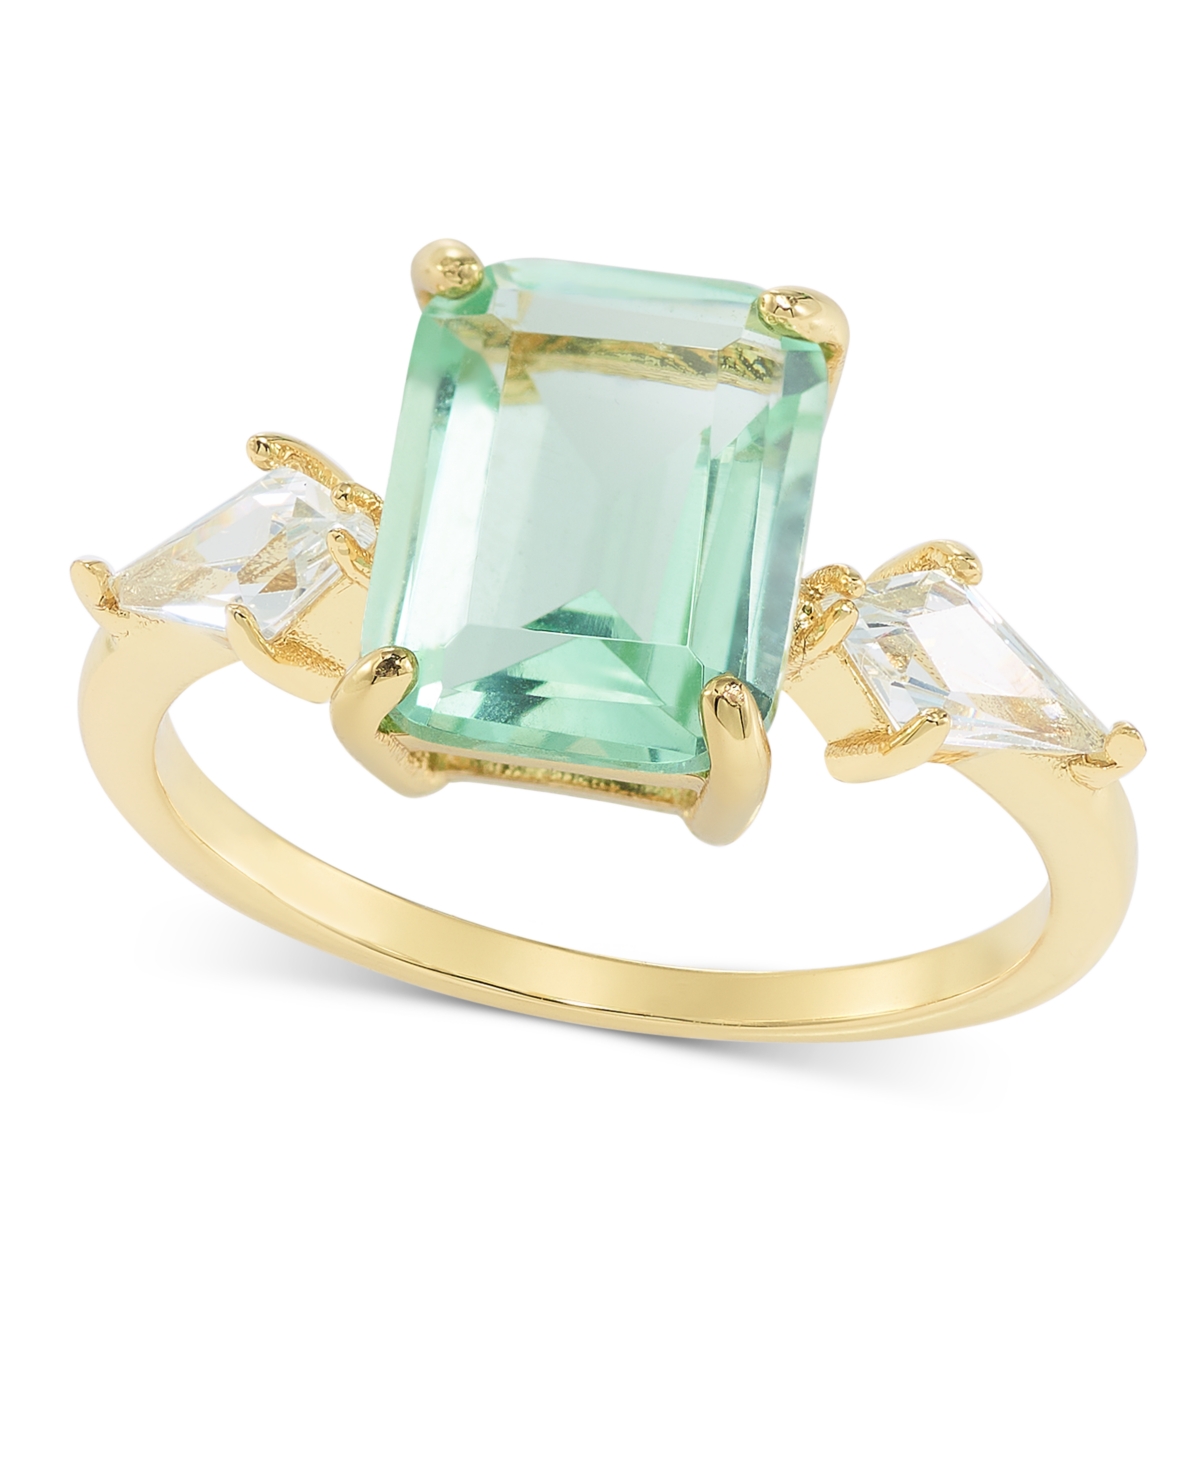 Gold-Tone Green Crystal & Cubic Zirconia Ring, Created for Macy's - Gold